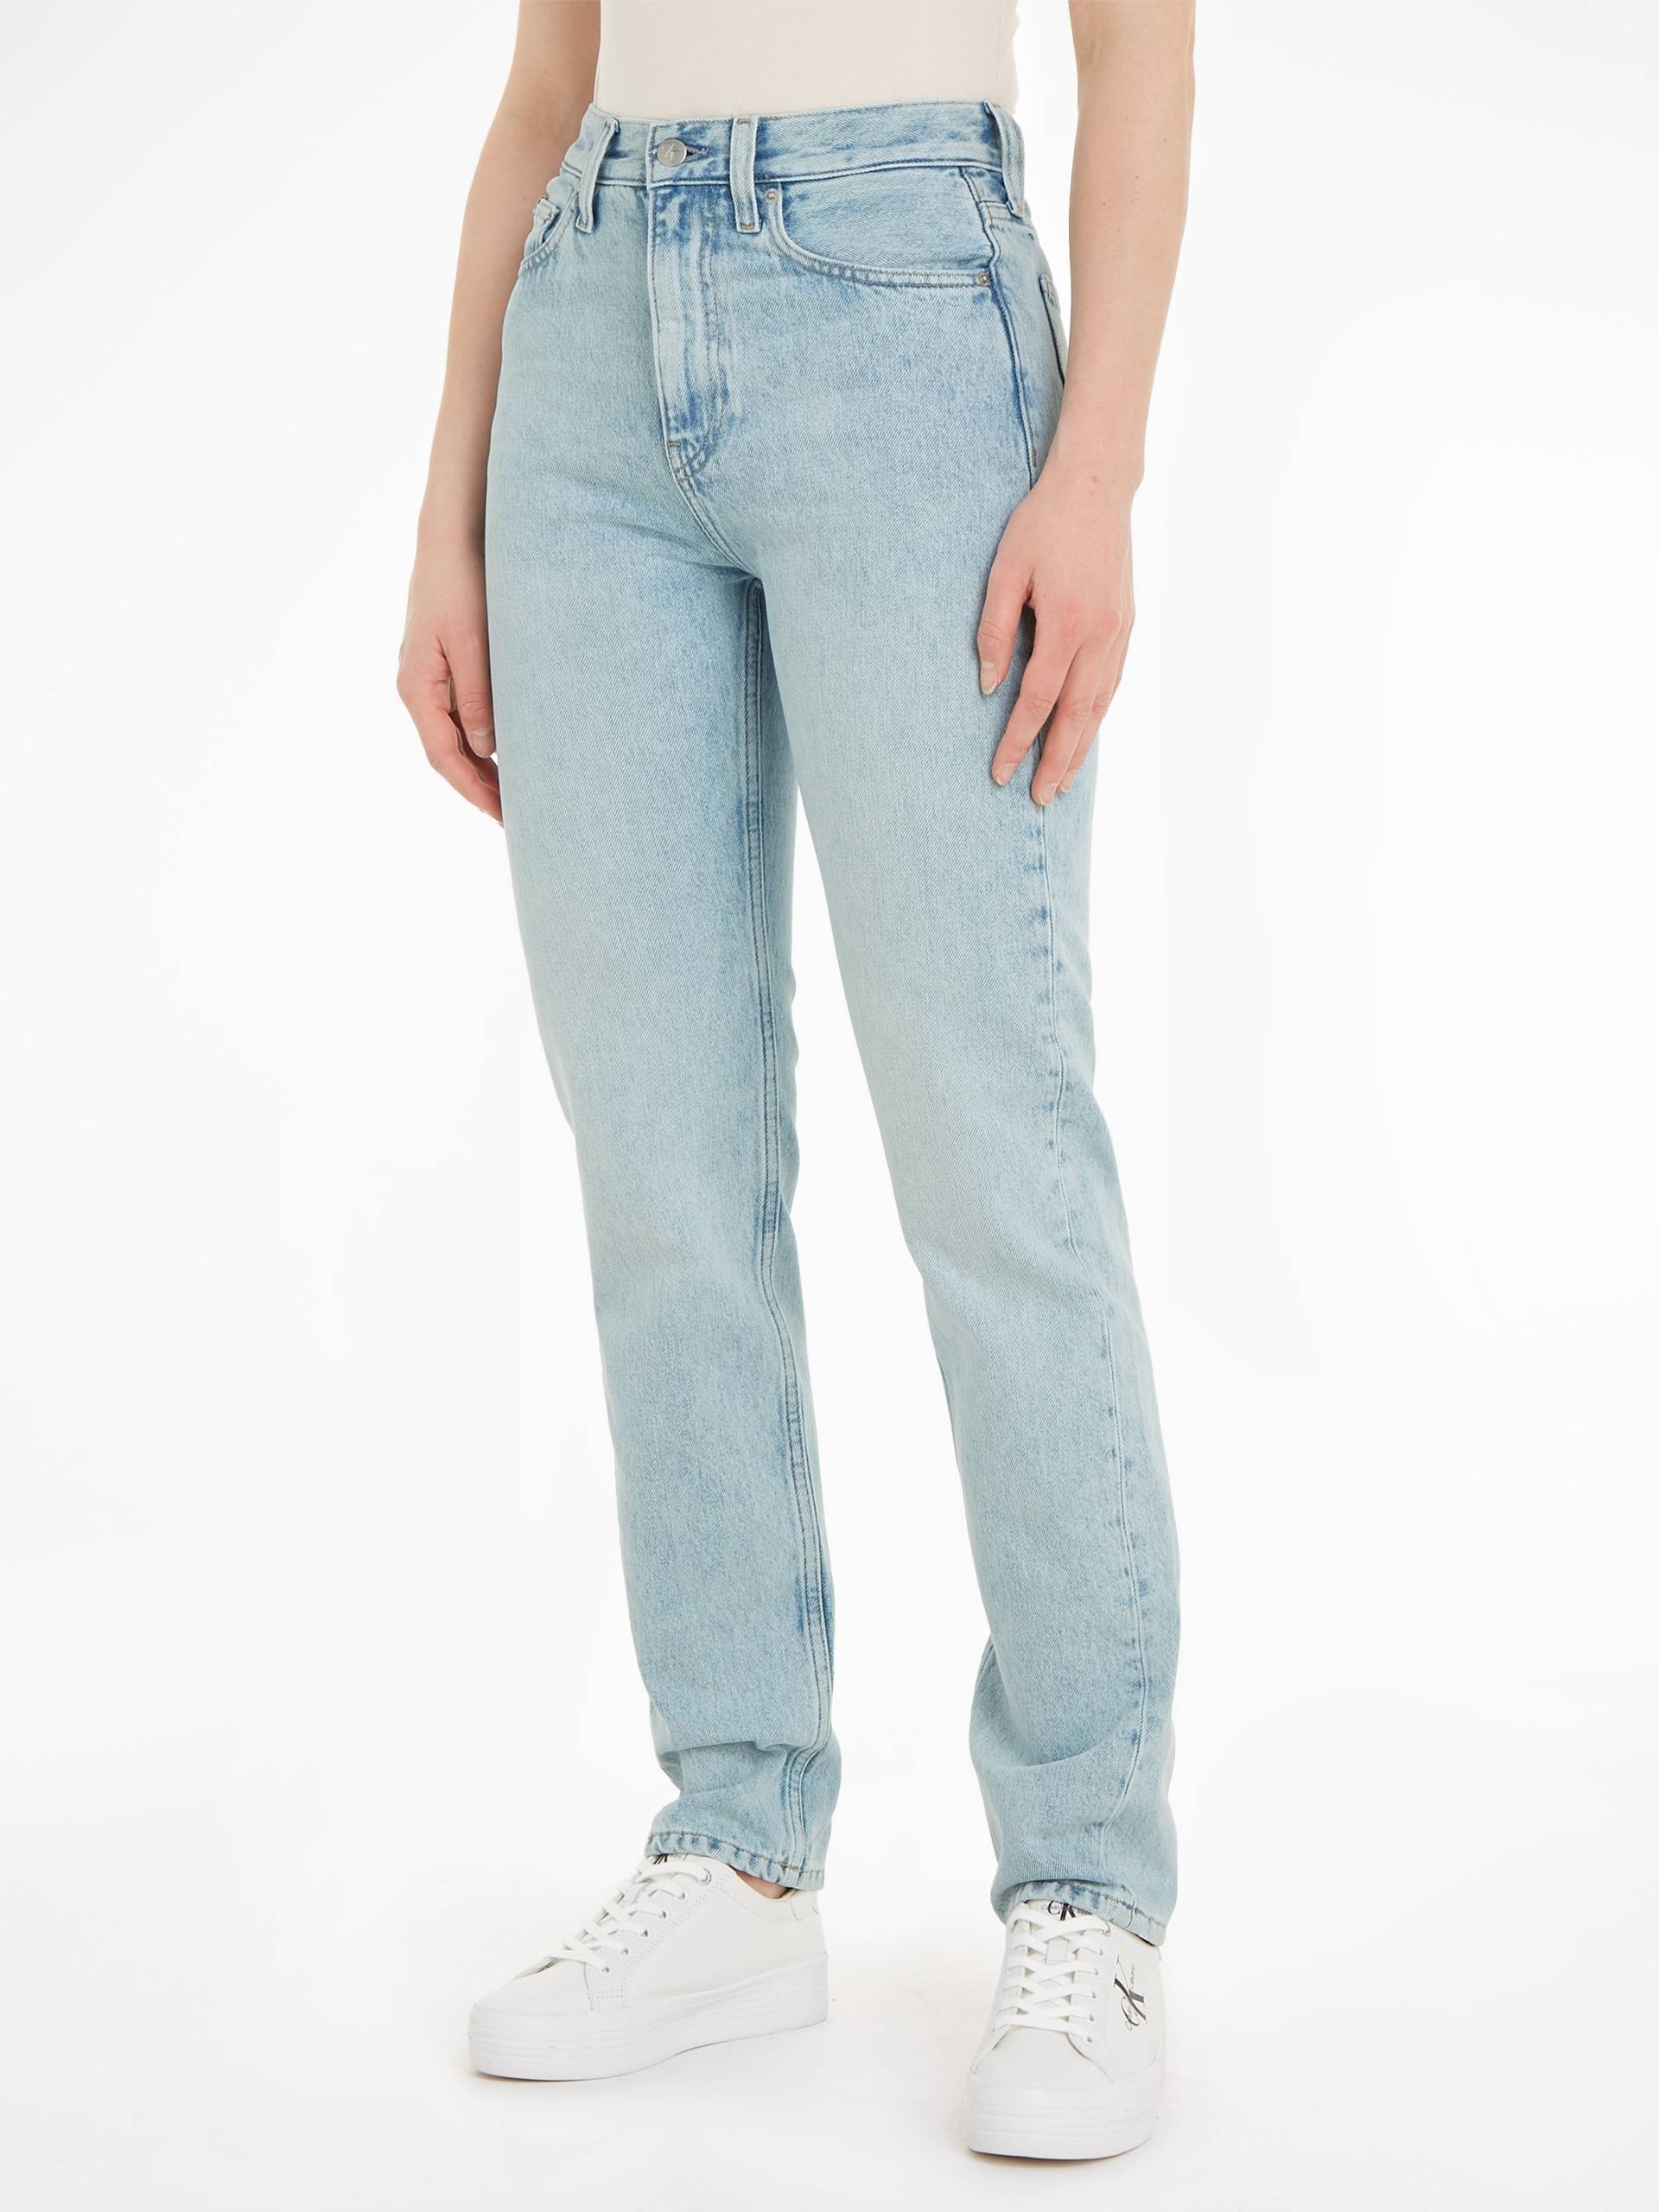 Calvin Klein Jeans Straight-Jeans »AUTHENTIC SLIM STRAIGHT«, im 5-Pocket-Style von Calvin Klein Jeans